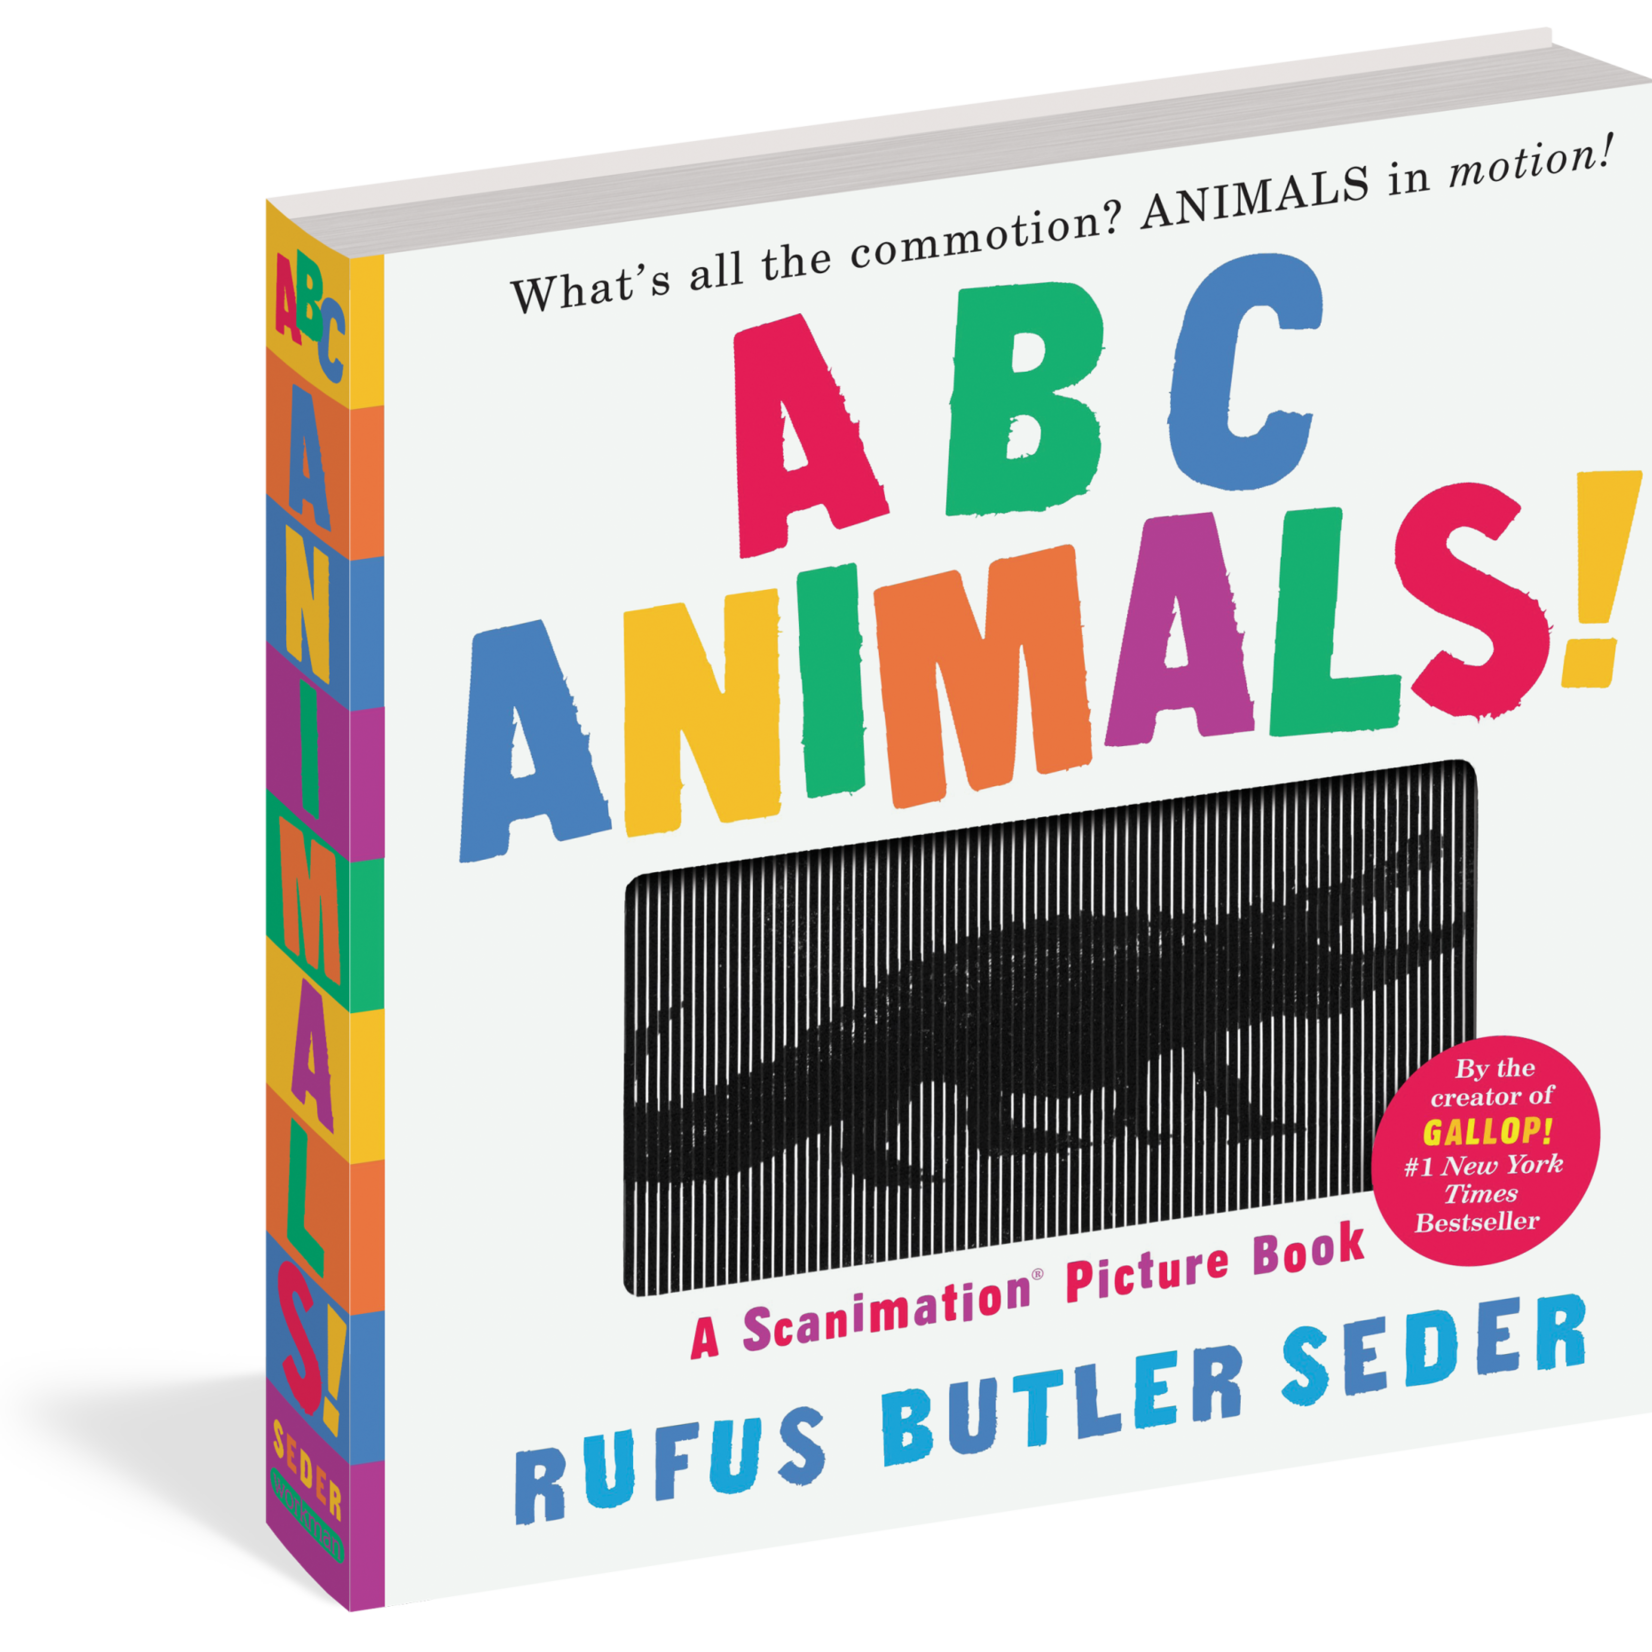 Hachette Book Group ABC Animals Scanimation Book